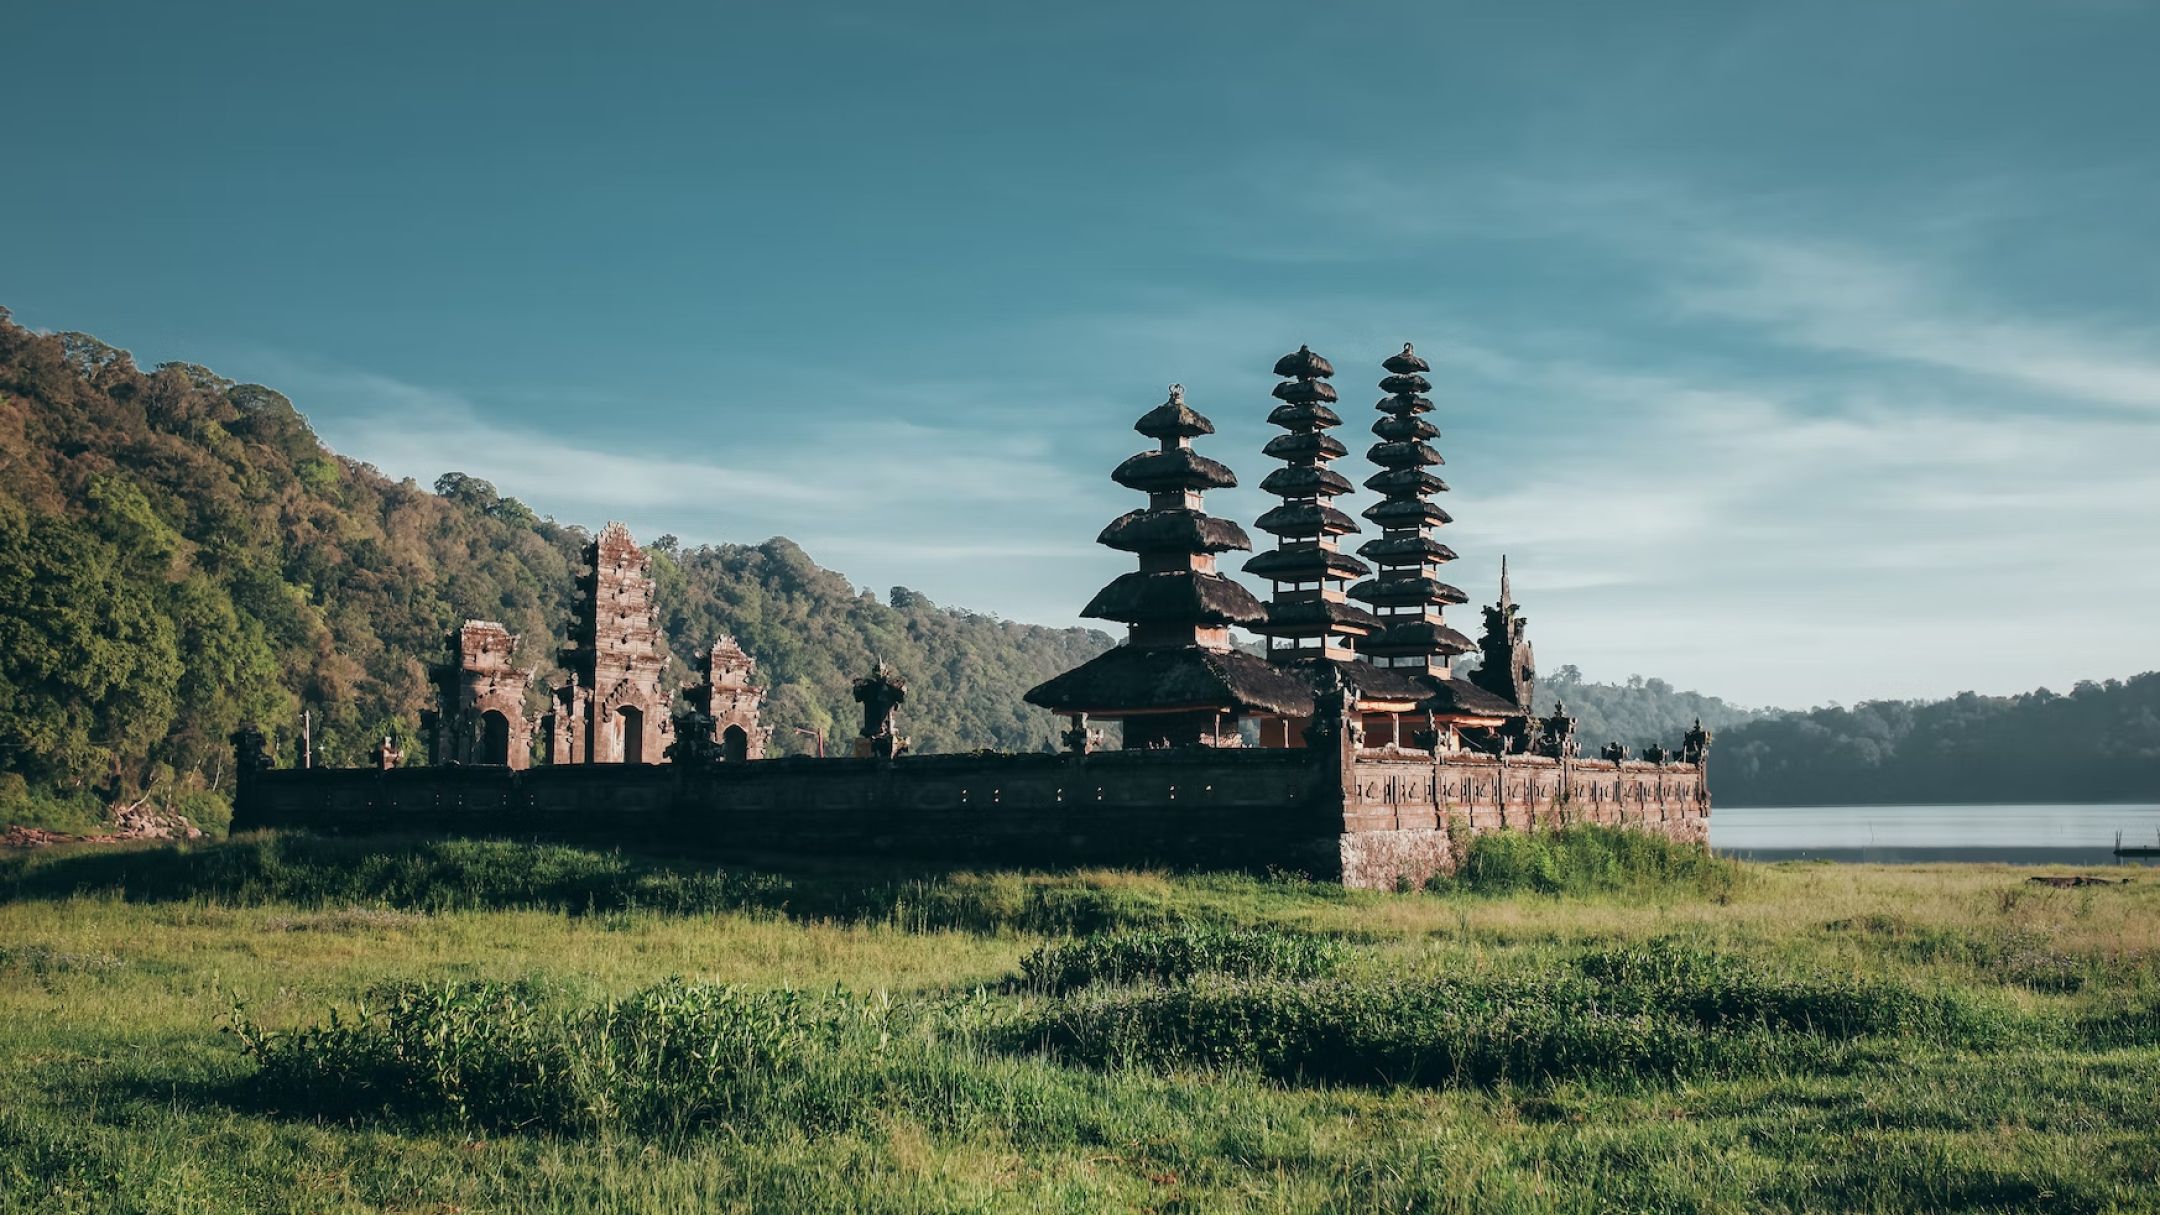 A stunning Indonesian Temple surrounded by nature. Qatar-Indonesia Photography Journey.